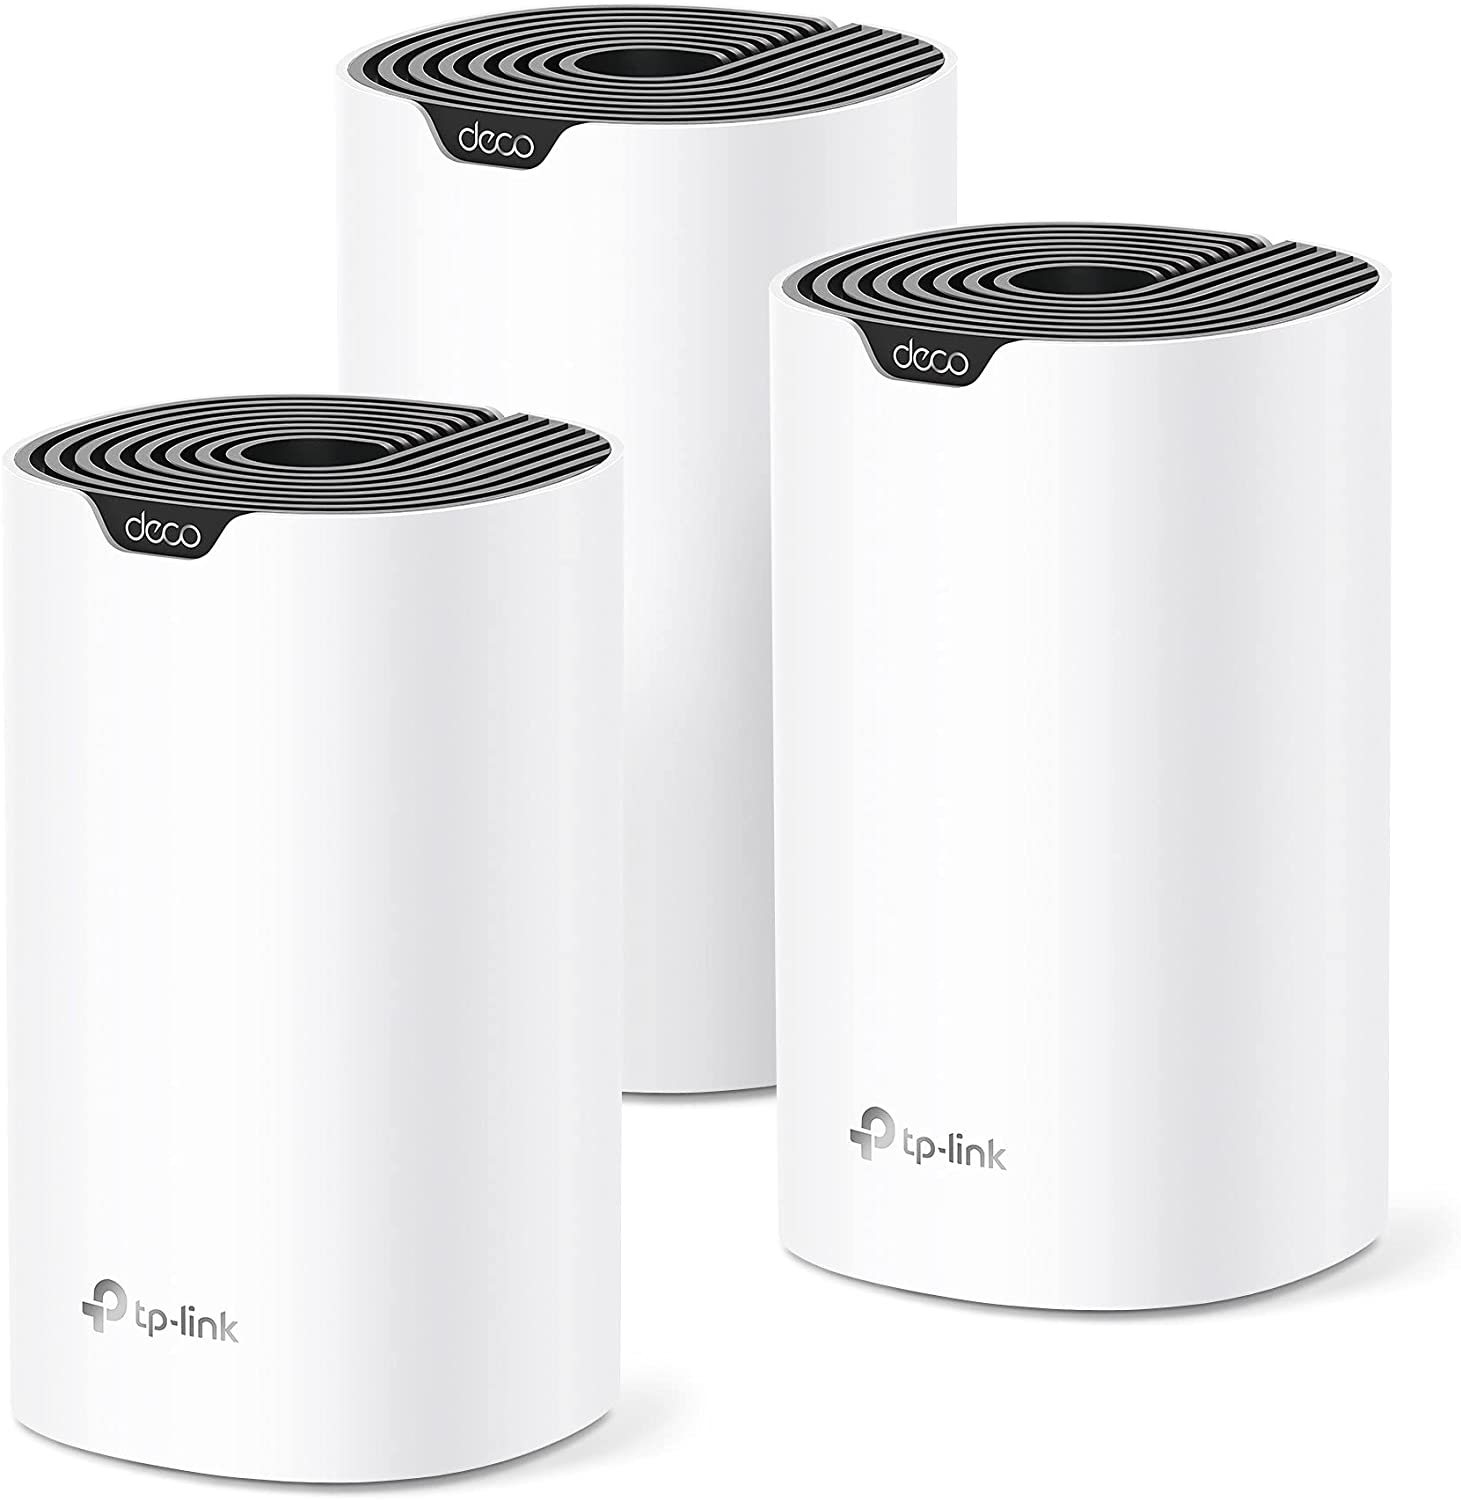 TP-Link Networking Early Black Friday Sales: Mesh Wifi 3-pack $109.99, AX1800 Router $74.99, AC1750 Router $49.99 & More on Amazon+FS